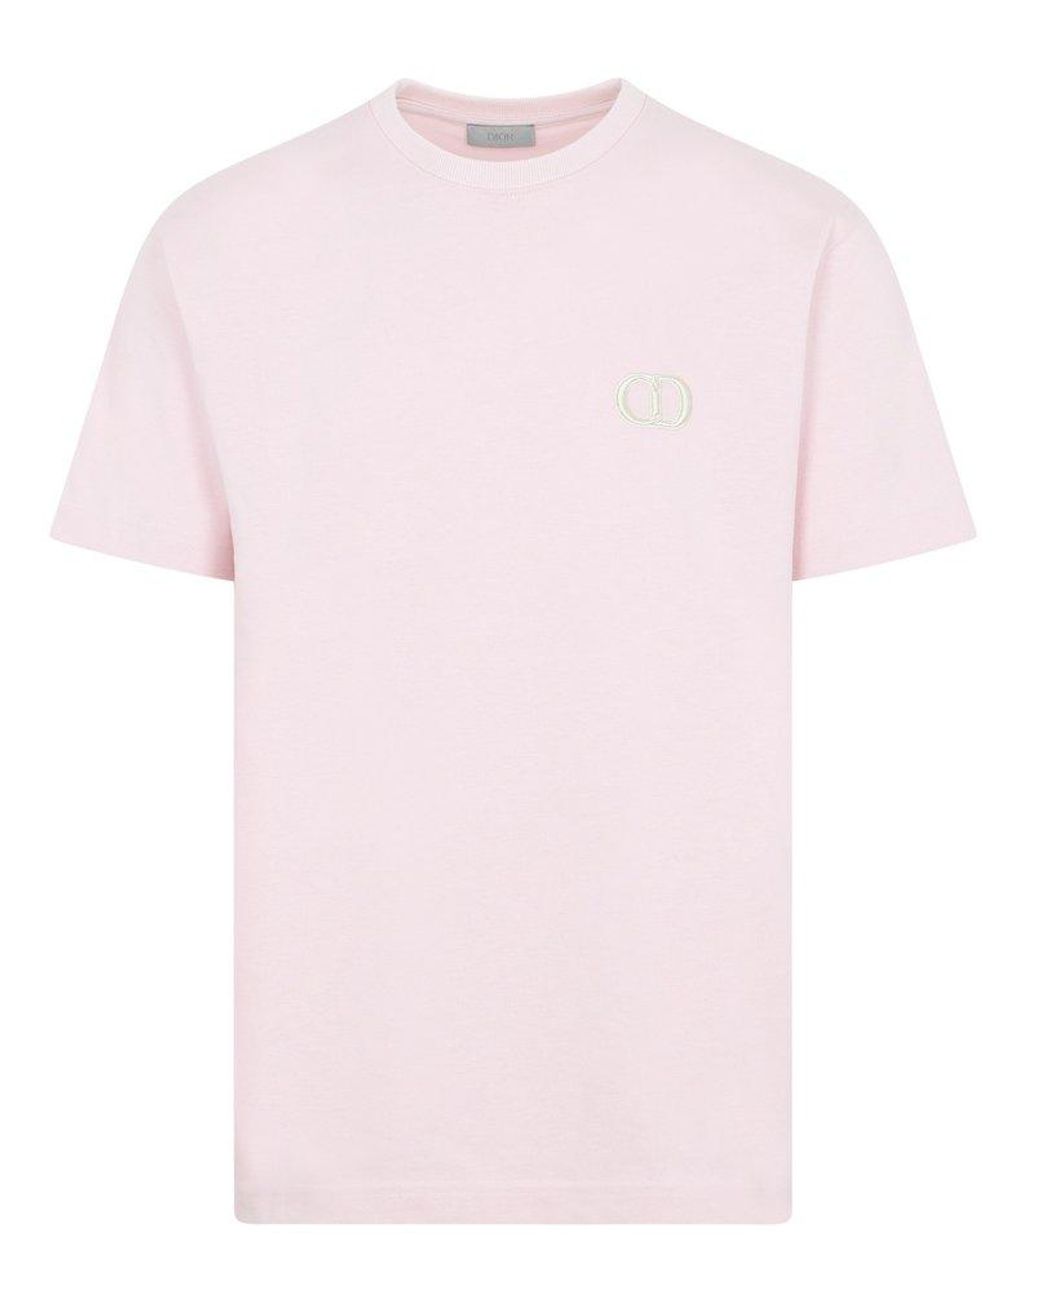 Dior Cd Embroidered Crewneck Tshirt in Pink for Men  Lyst